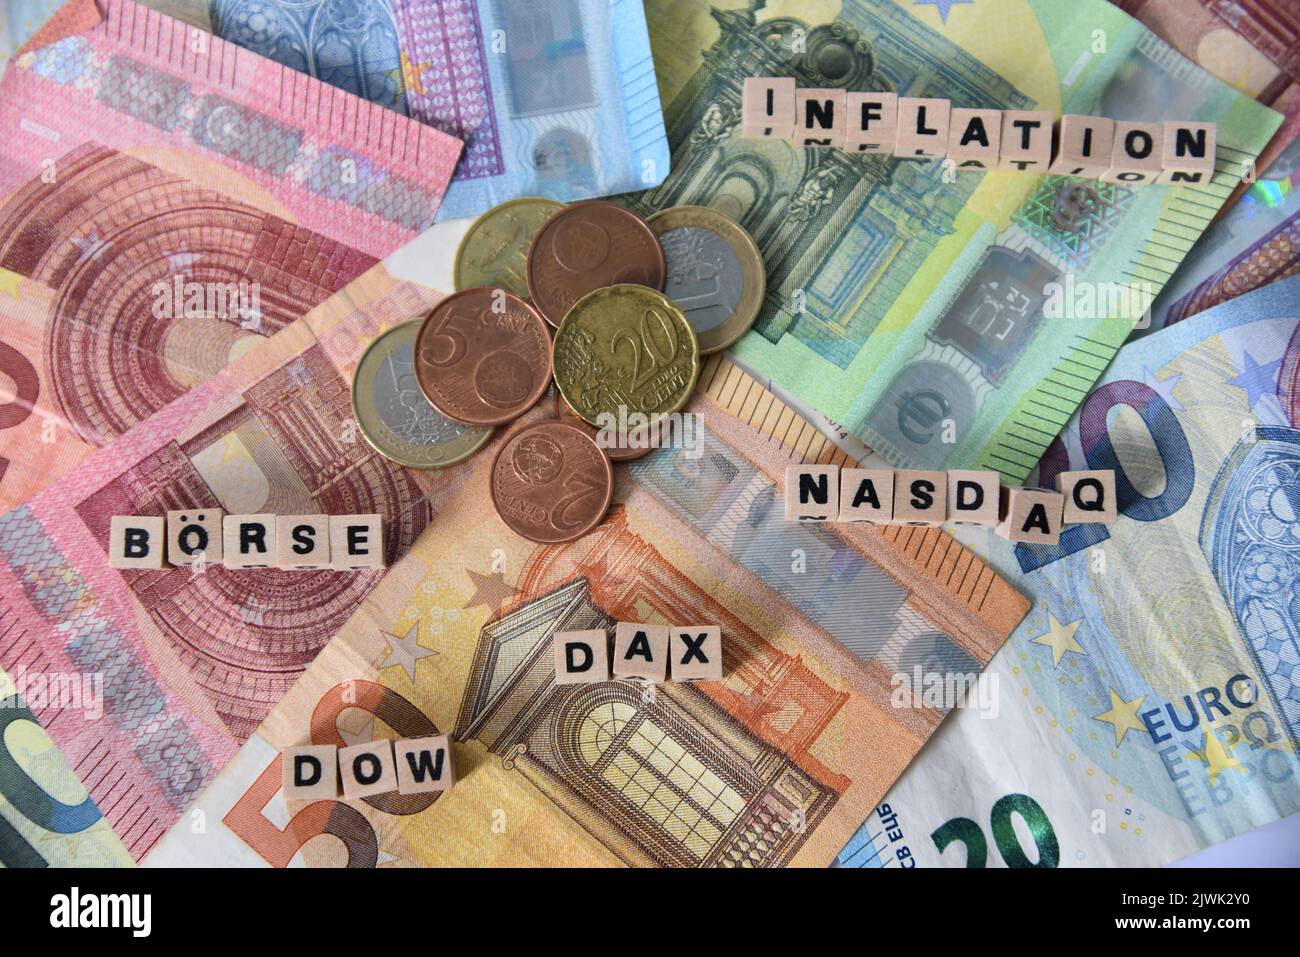 euro bank notes and the words of different stock exchanges like nasdaq, dow jones and dax Stock Photo